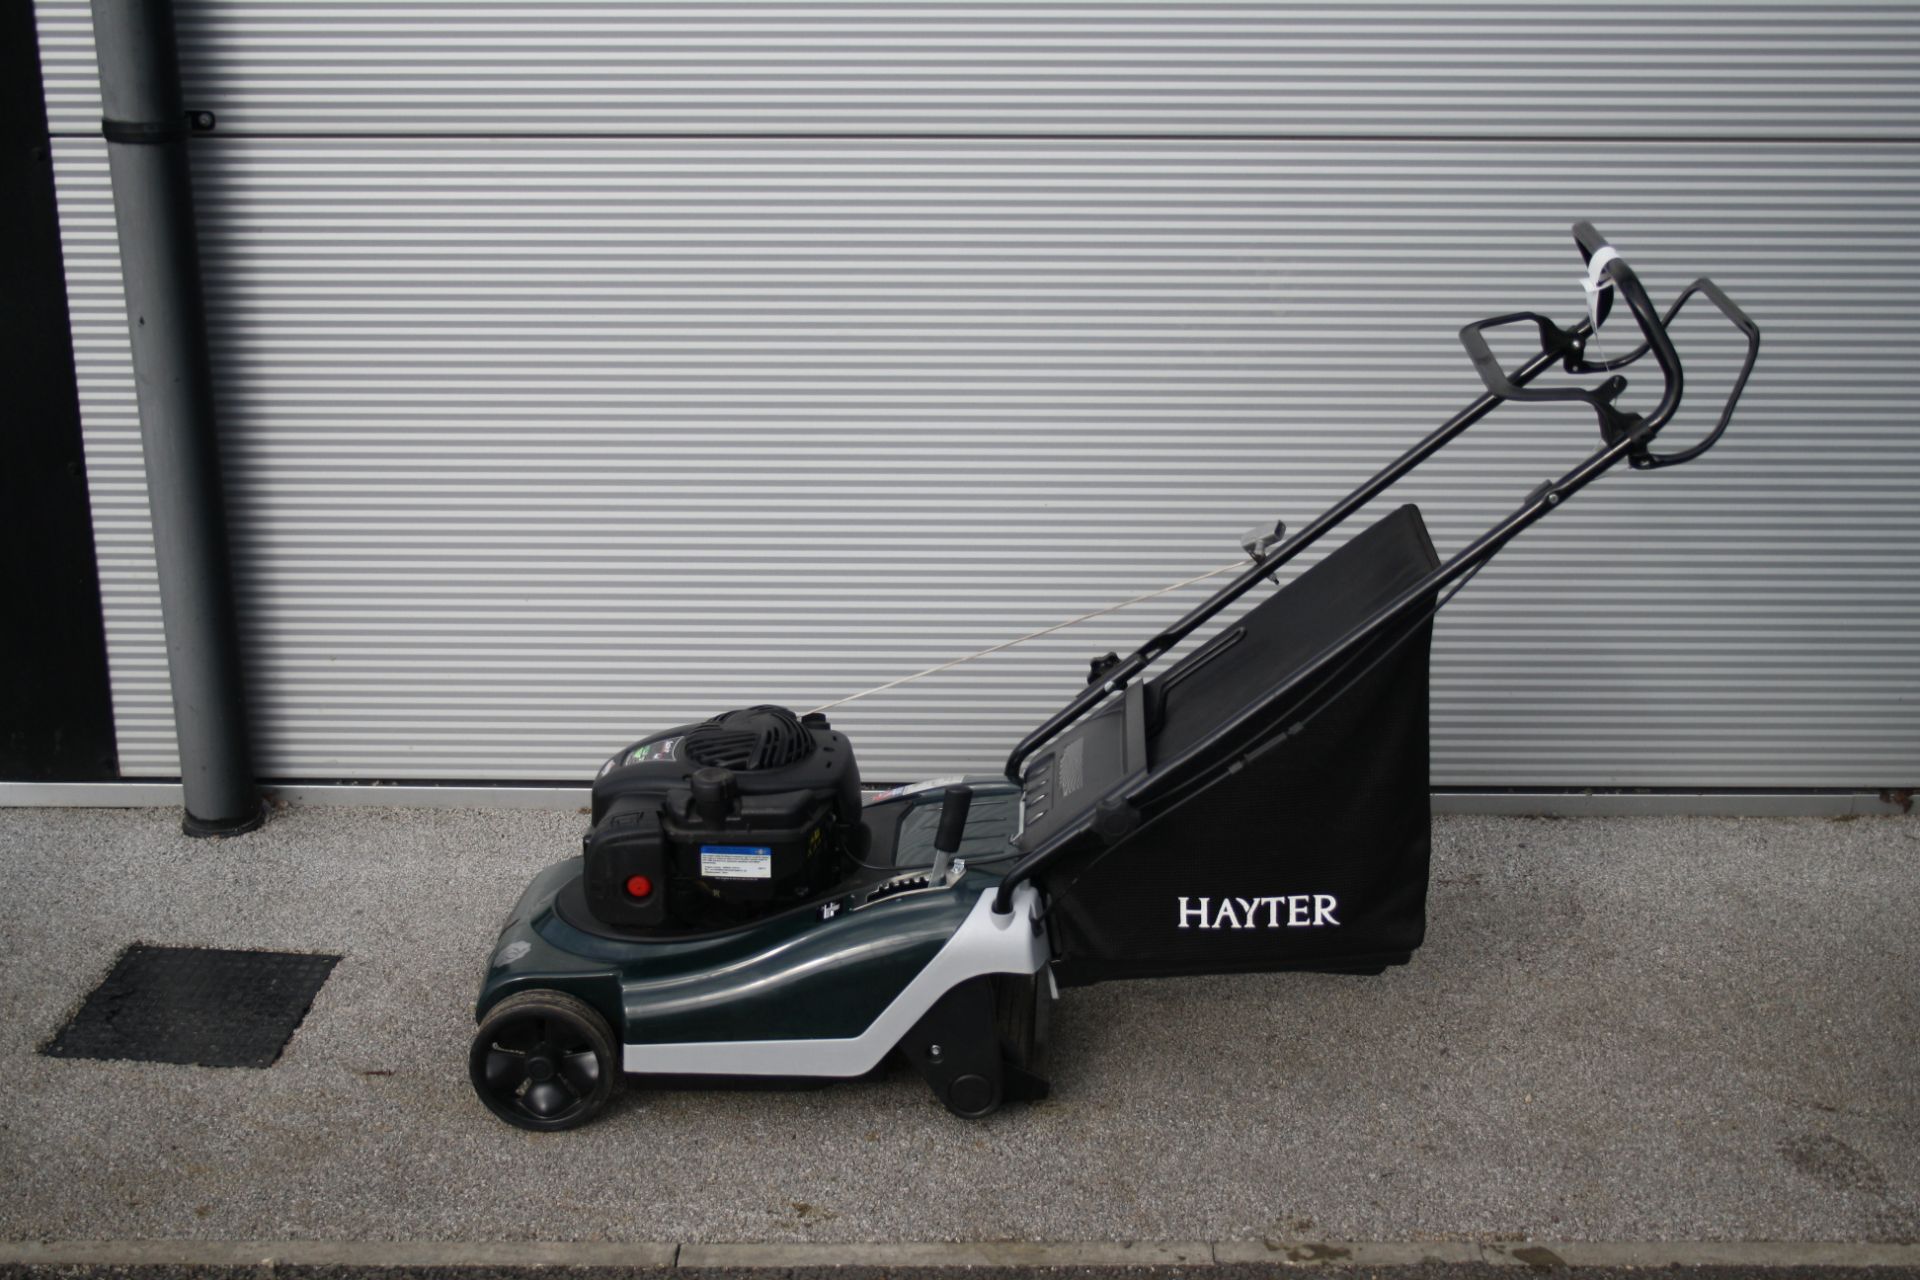 HAYTER SPIRIT 41 SELF PROPELLED MOWER - EX SHOWROOM NEW CONDITION WITH A FEW SCRATCHES